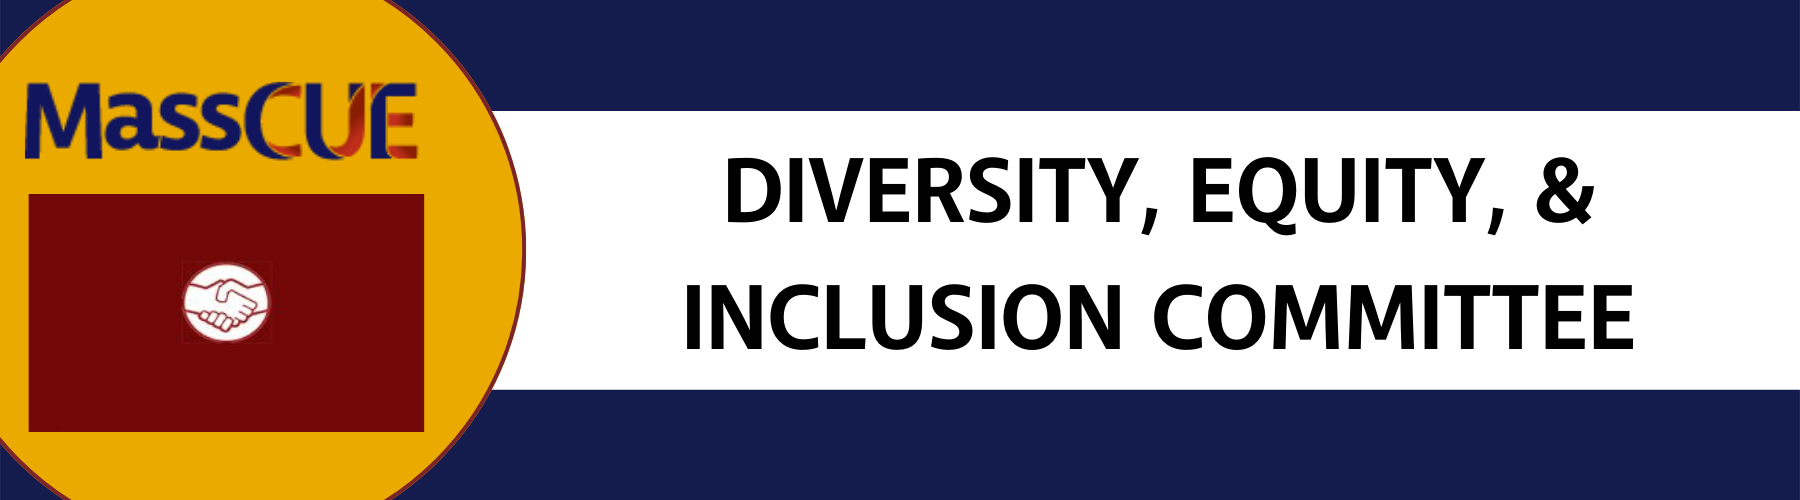 Diversity Equity and Inclusion Committee